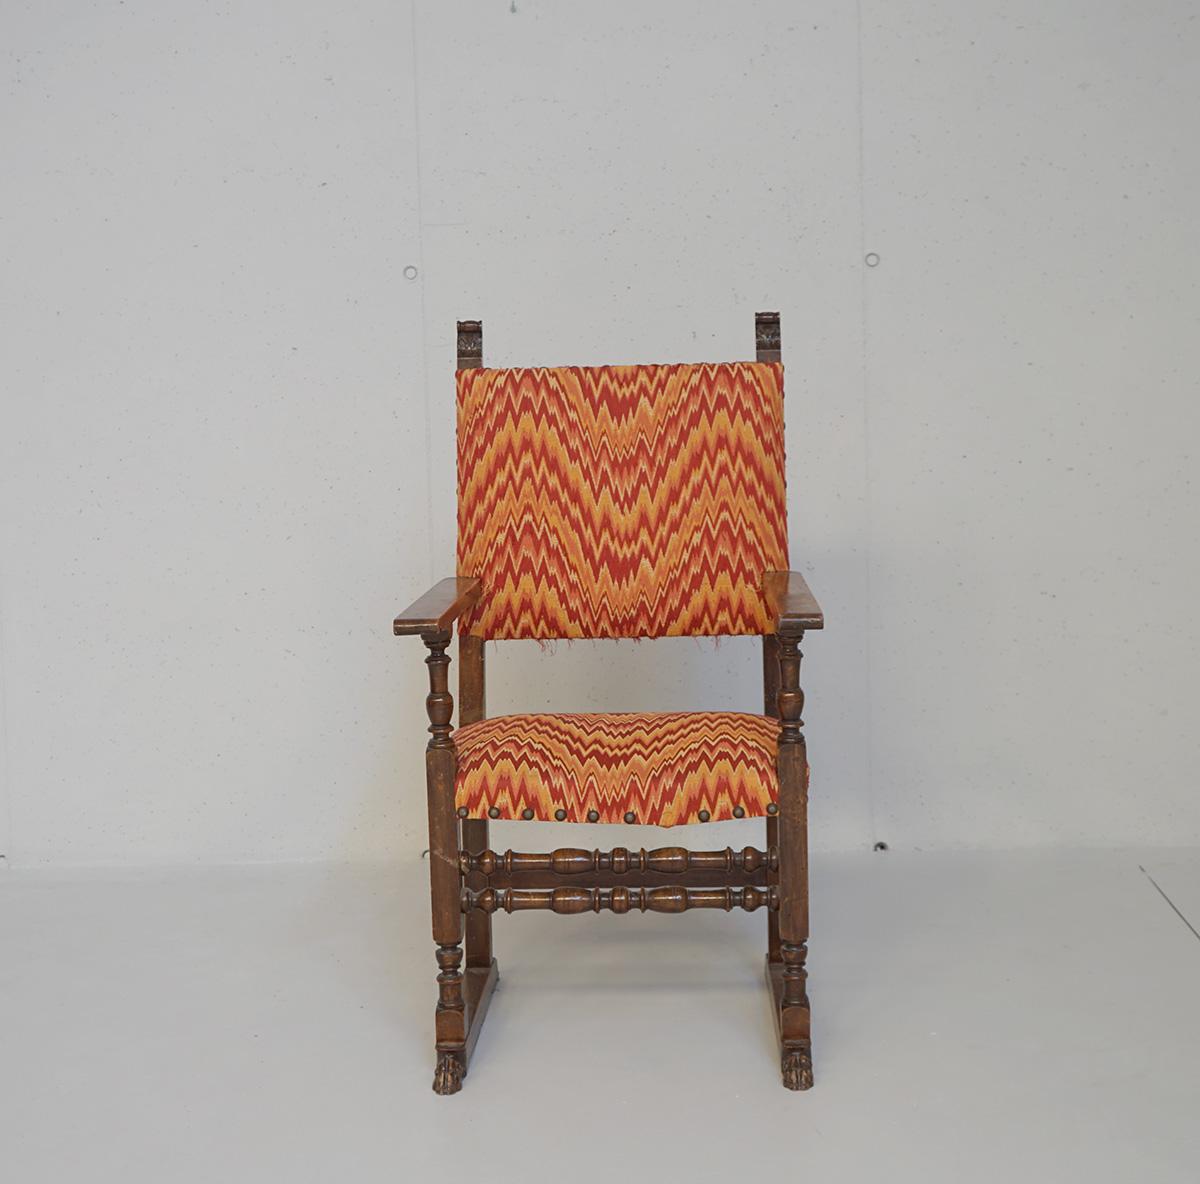 Set of four armchairs of the late 1800 in the style of the sixteenth century. The armchairs are mede in solid walnut, with straight armrest and all round turned spool sleepers. The feet are cantilevered with a lion’s foot decoration. They feature a